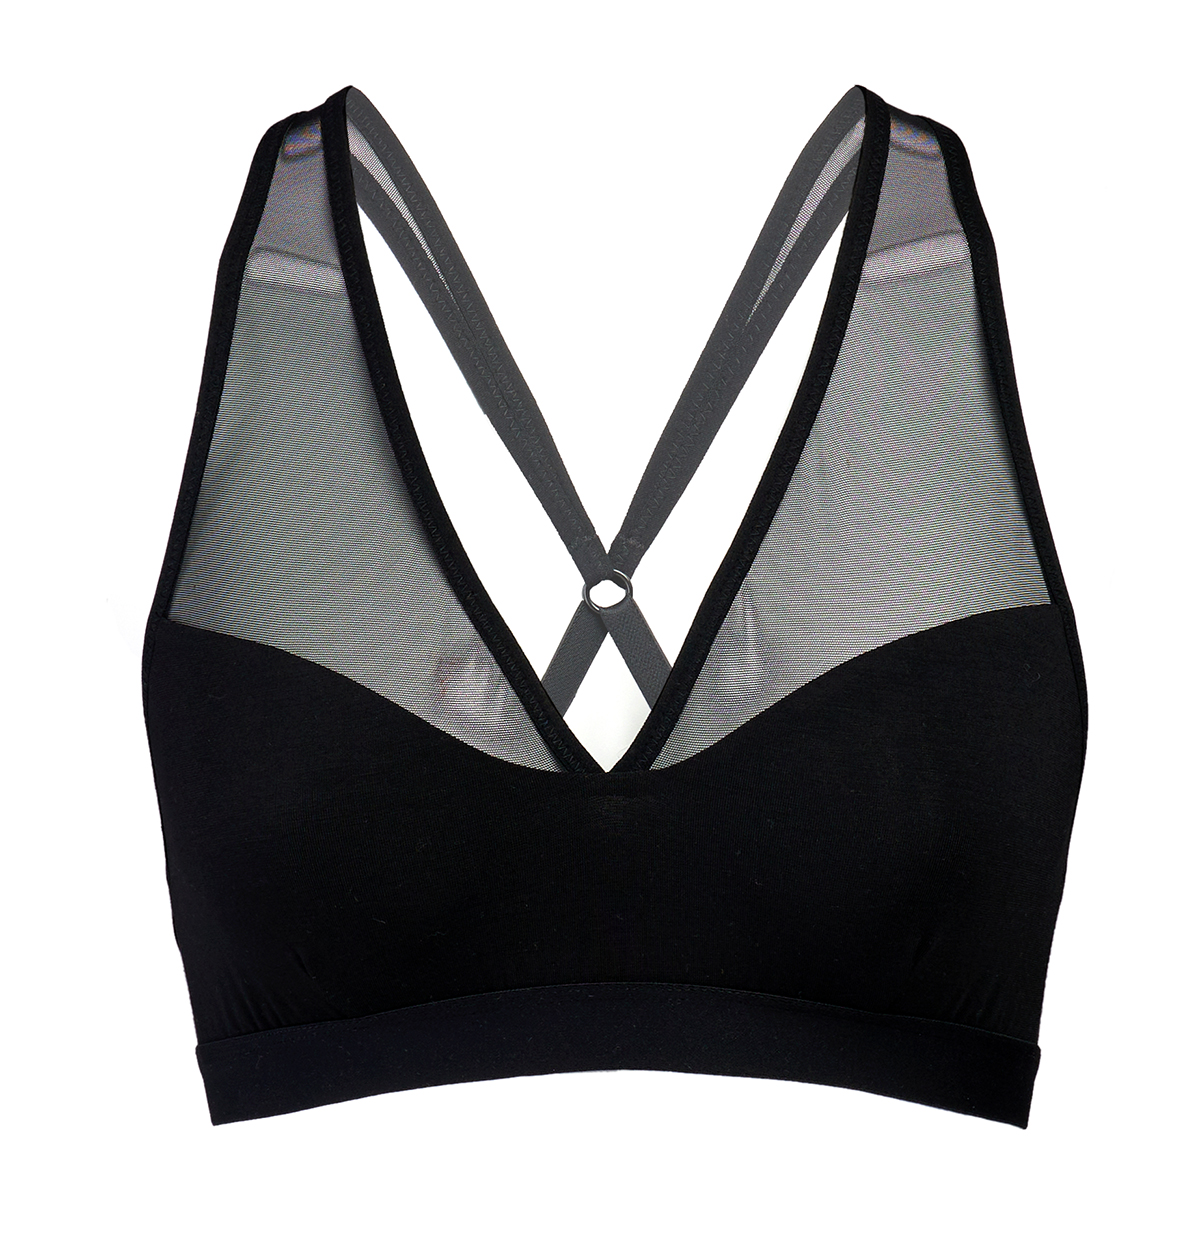 Longline mesh and jersey bralette by Flash Lingerie